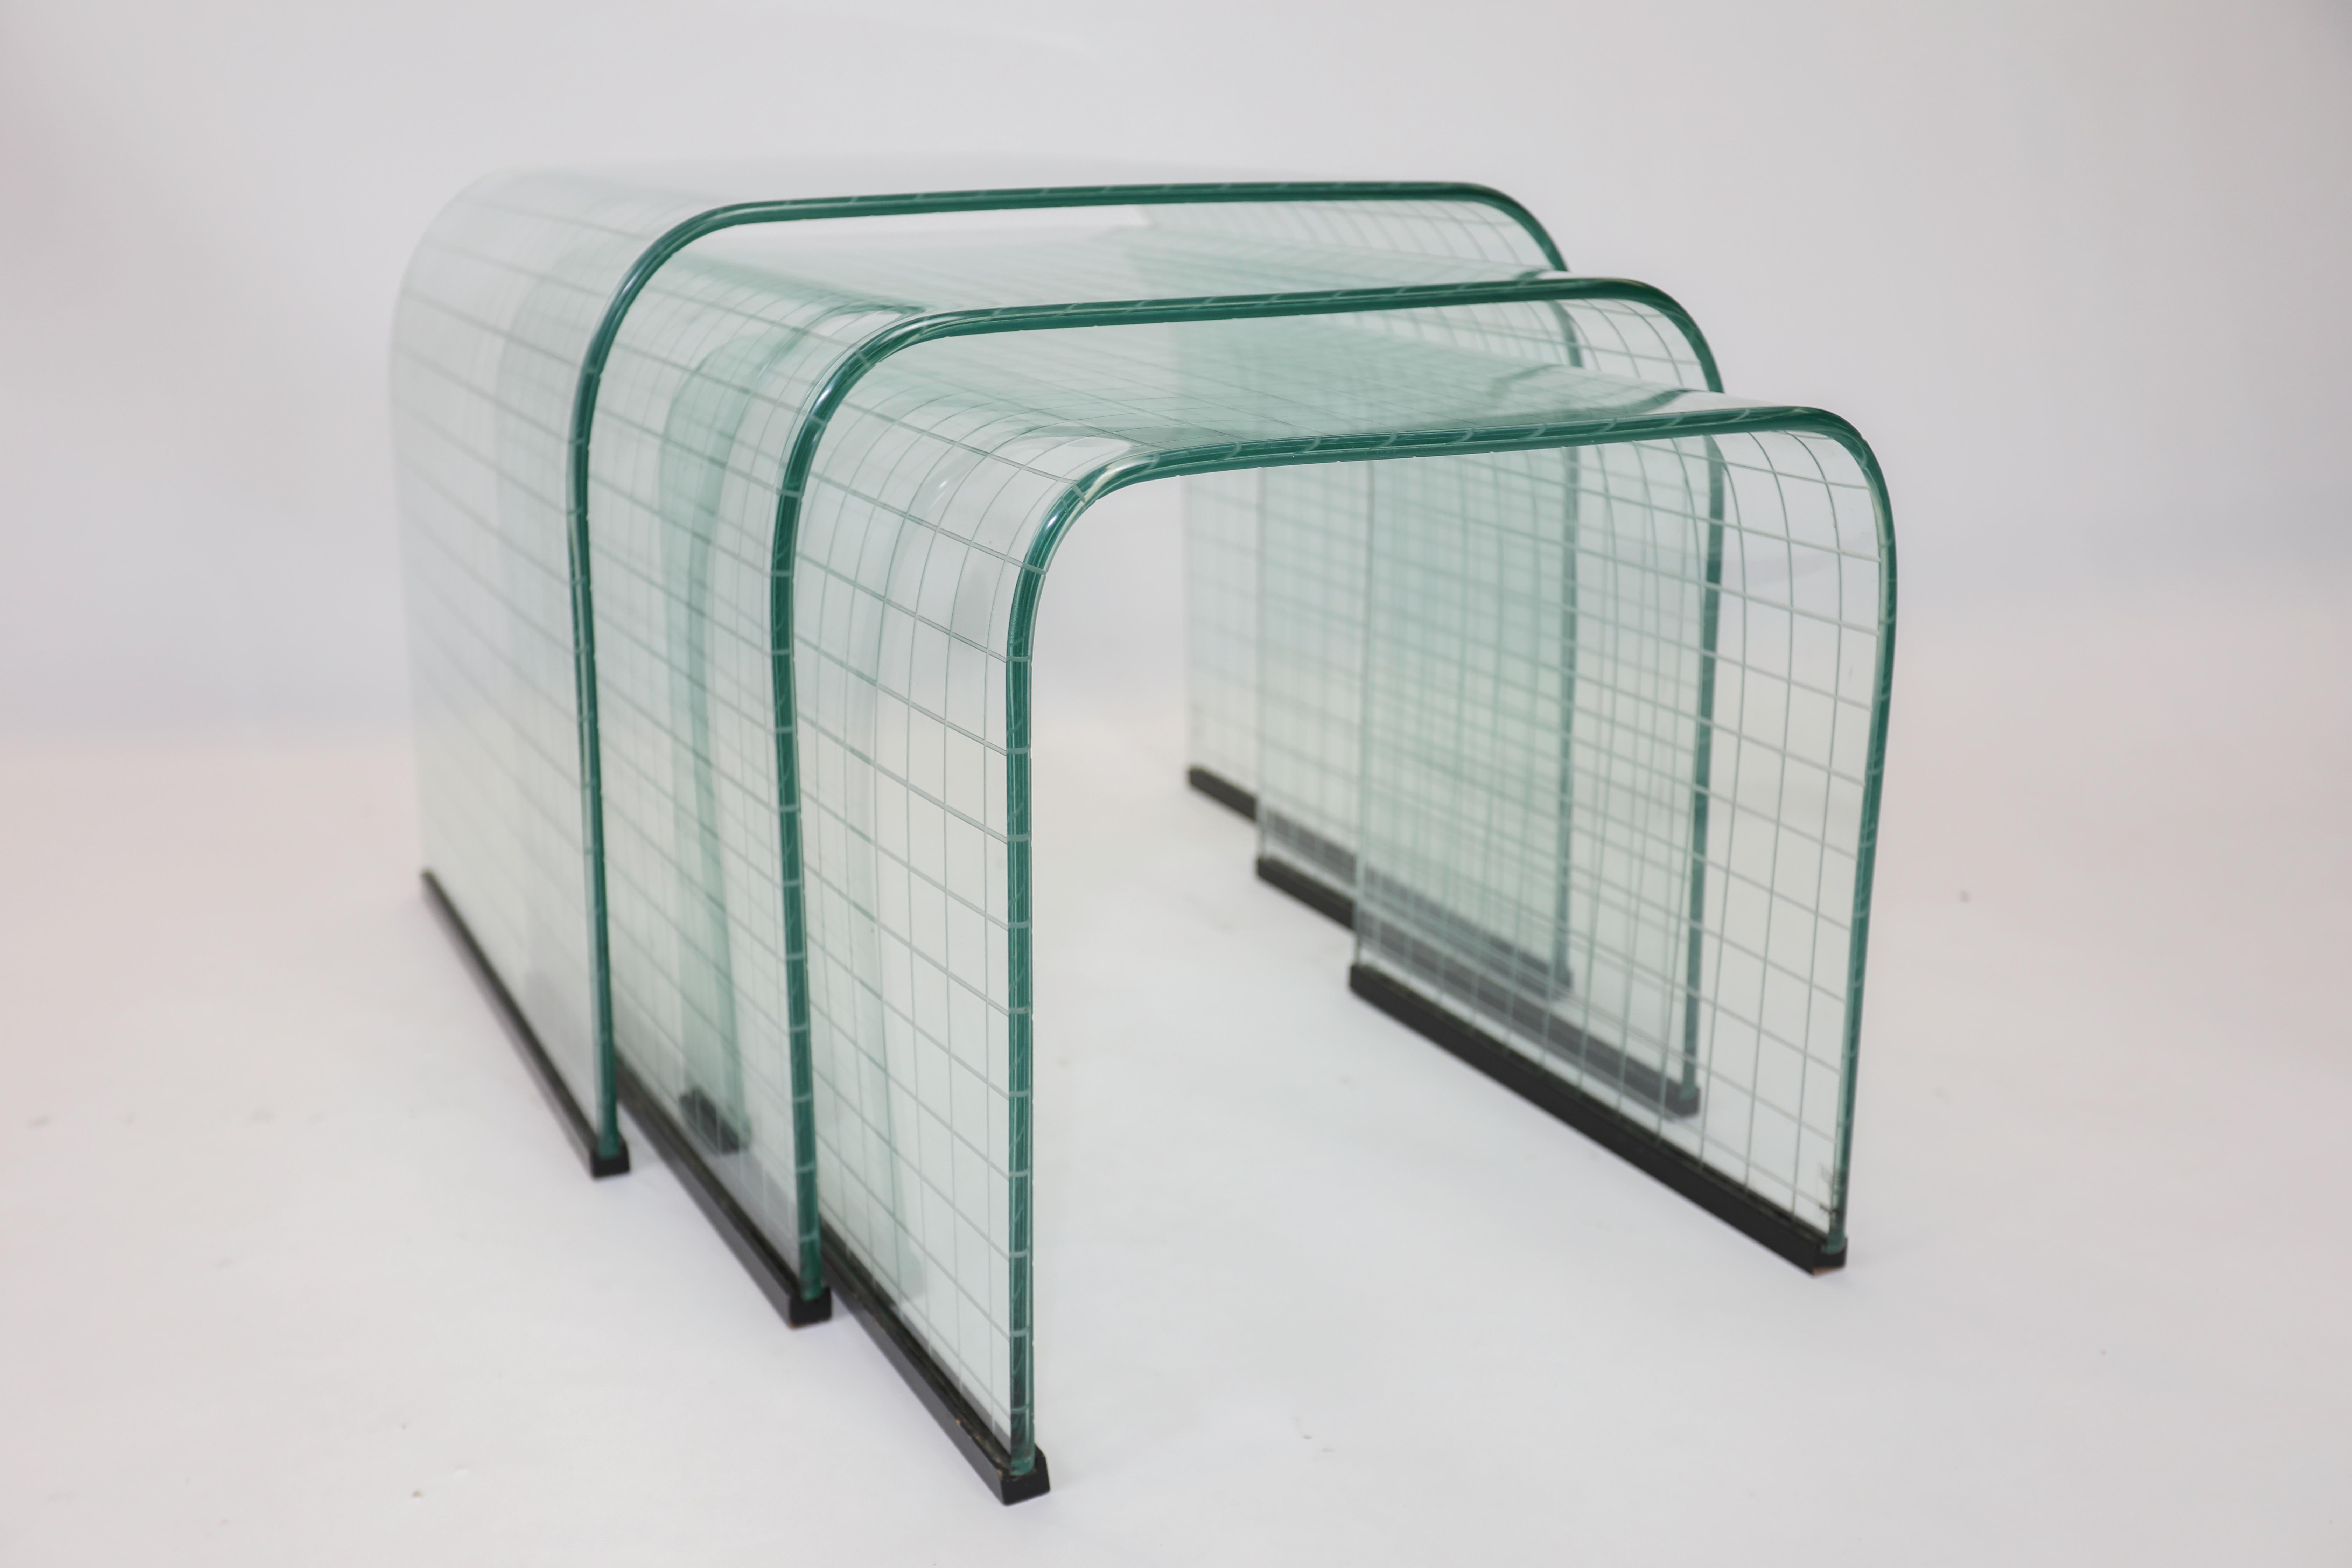 A set of 3 Grid pattern nest tables.
Designed by Angelo Cortesi and Manufactured by Fiam C.1975.
Label present
One minor edge chip (see detail images).